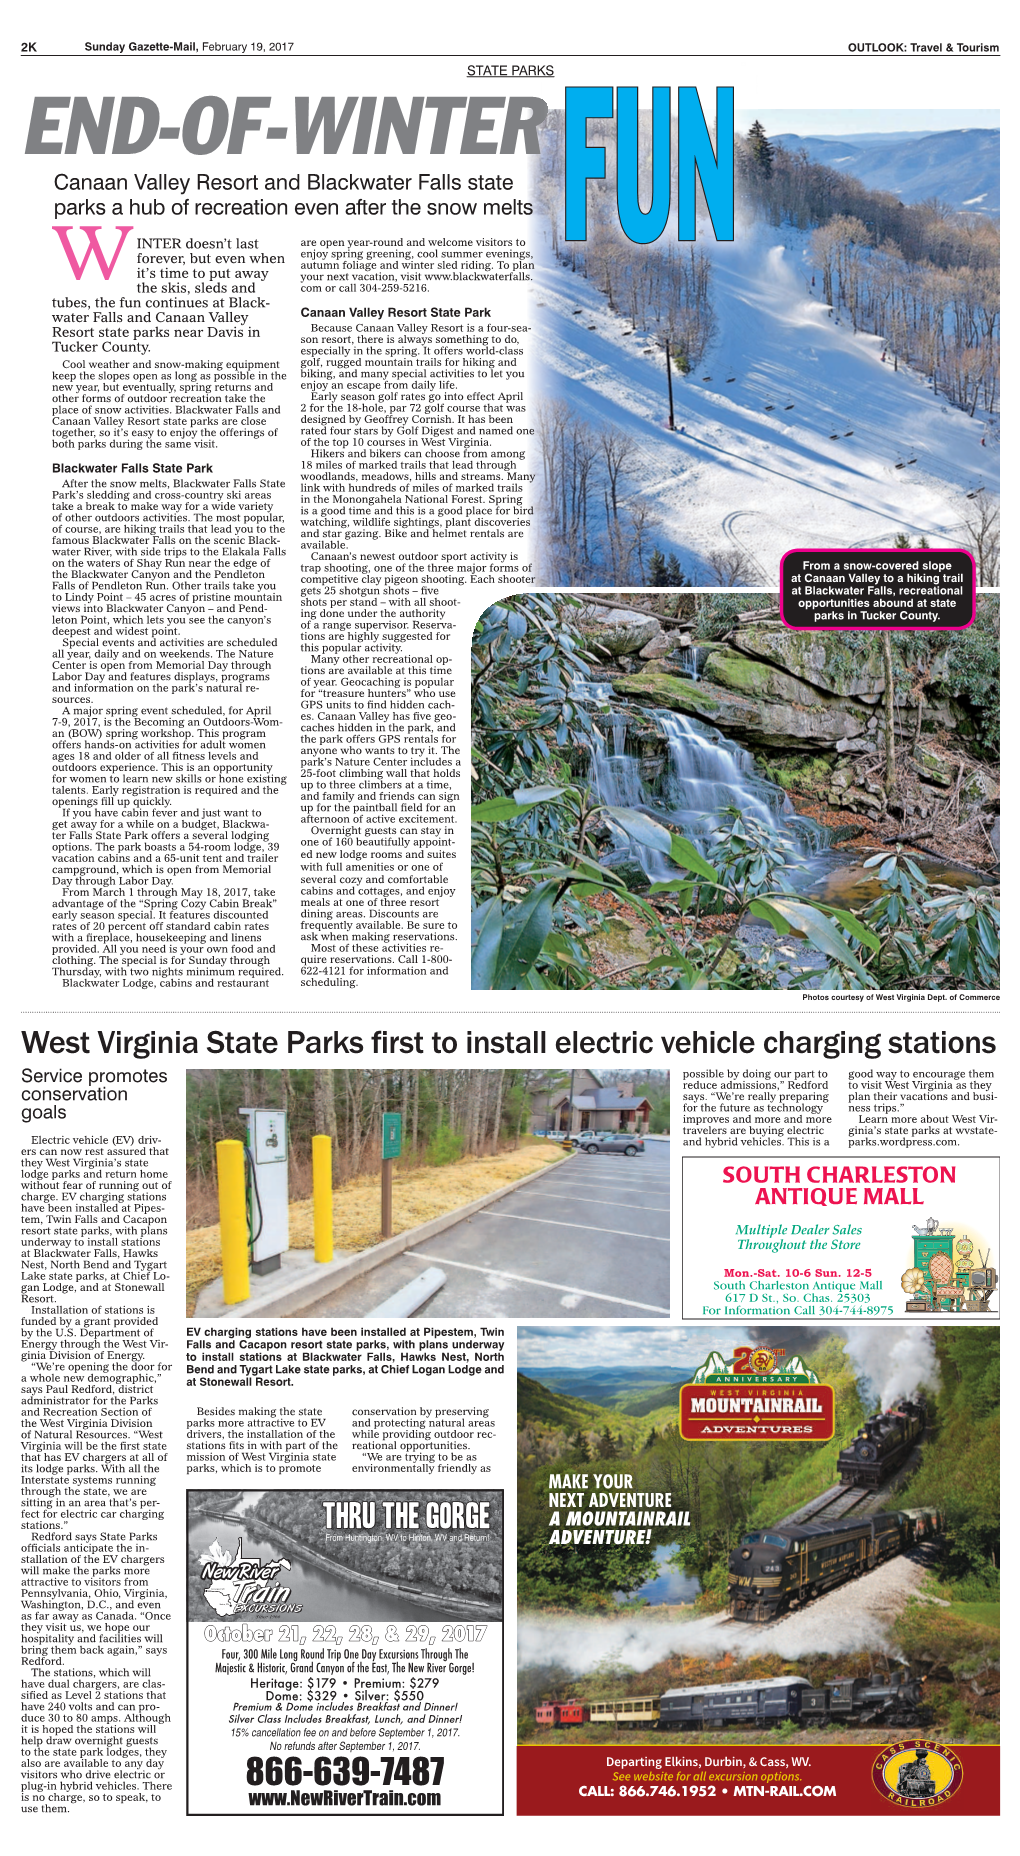 West Virginia State Parks Irst to Install Electric Vehicle Charging Stations